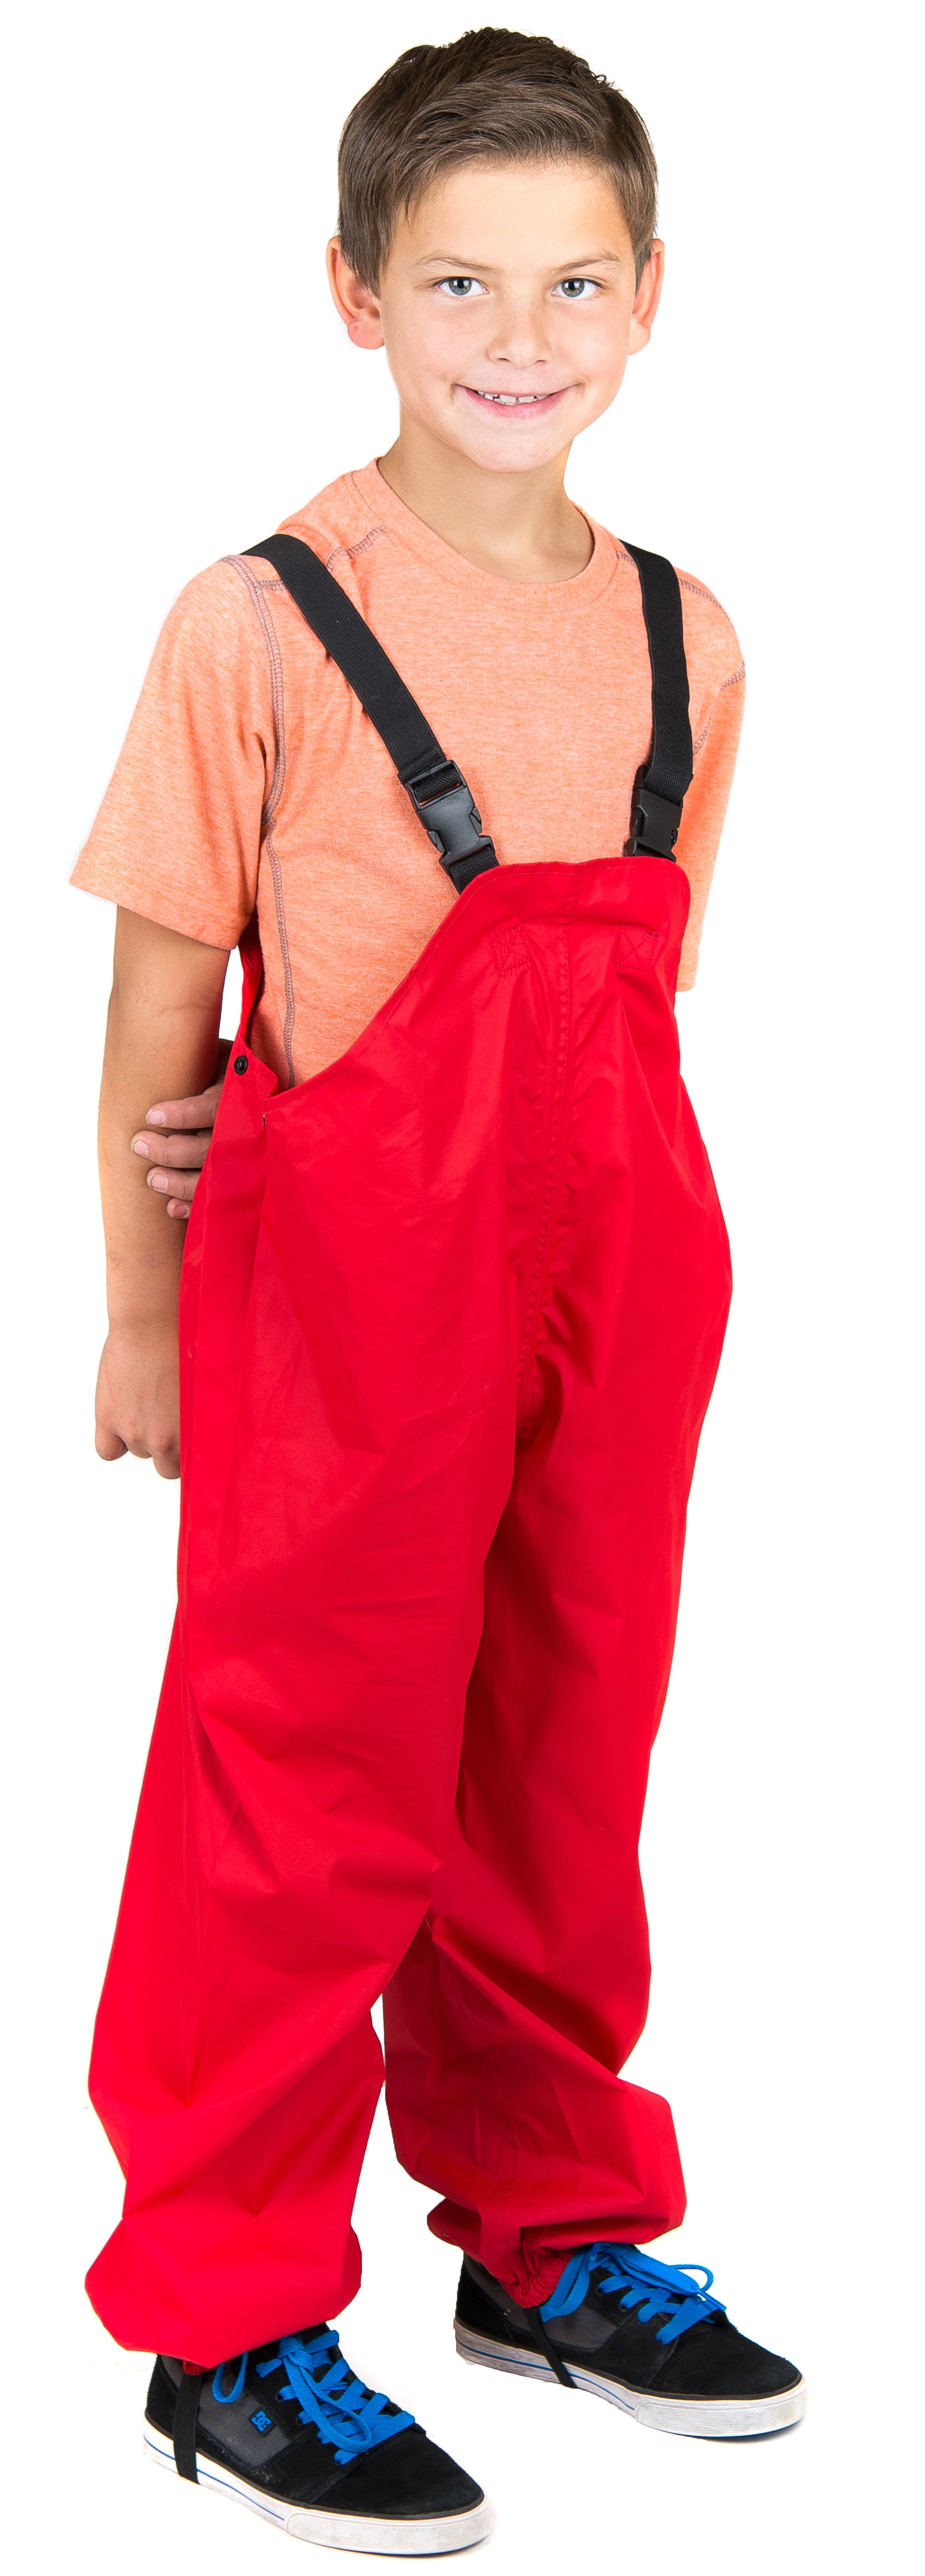 Sizes for Ages 1 Through 8 Suse's Kinder Tough Nylon Rain Overall Pants for Children 